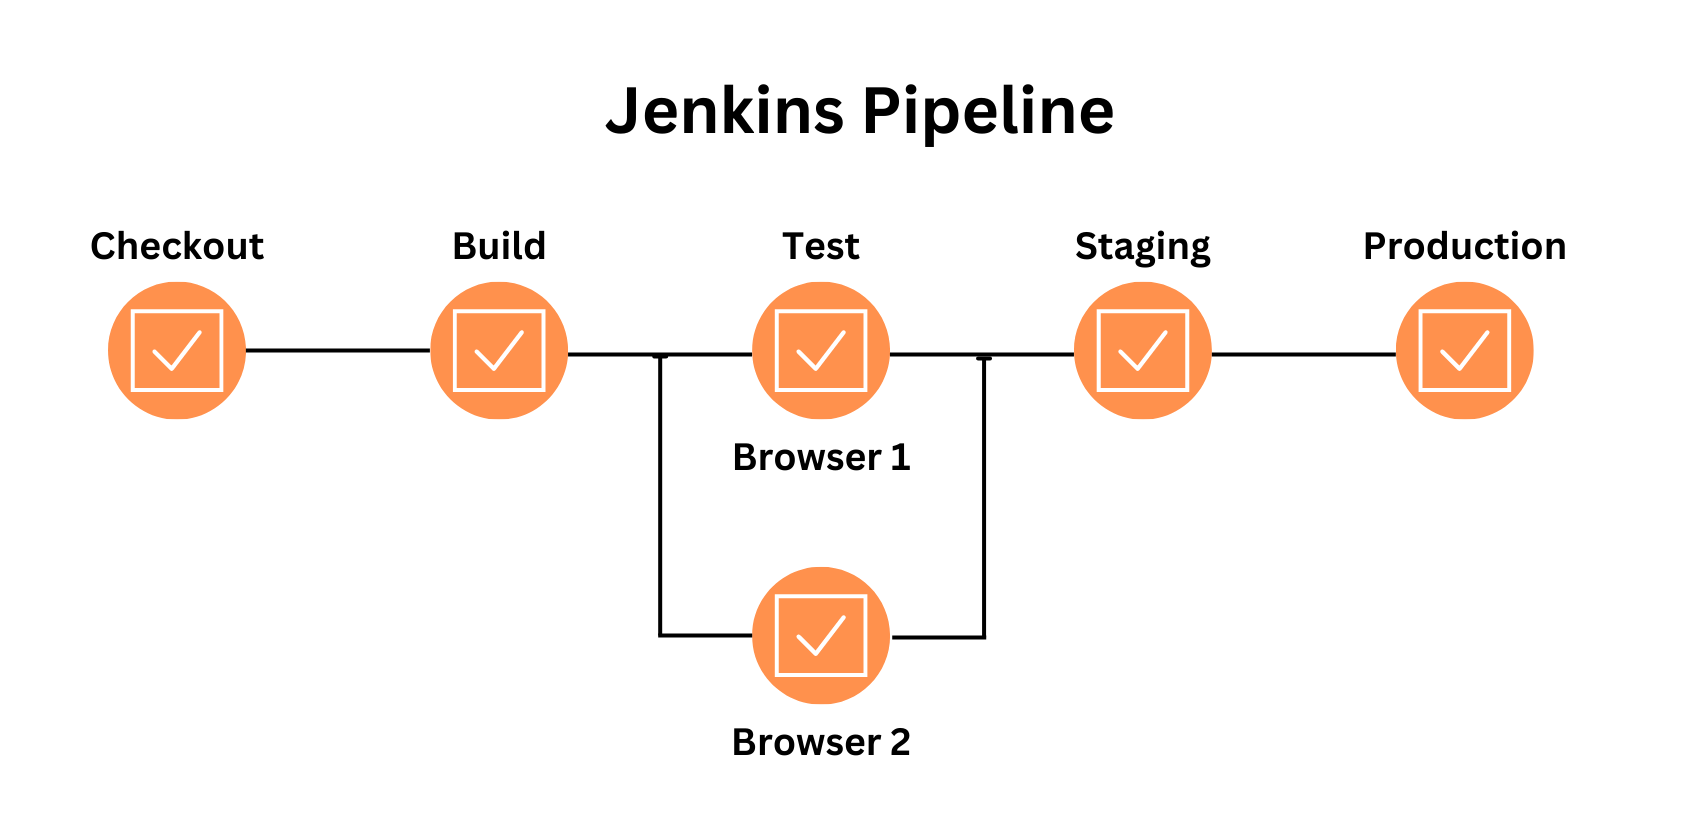 What is a Jenkins pipeline?